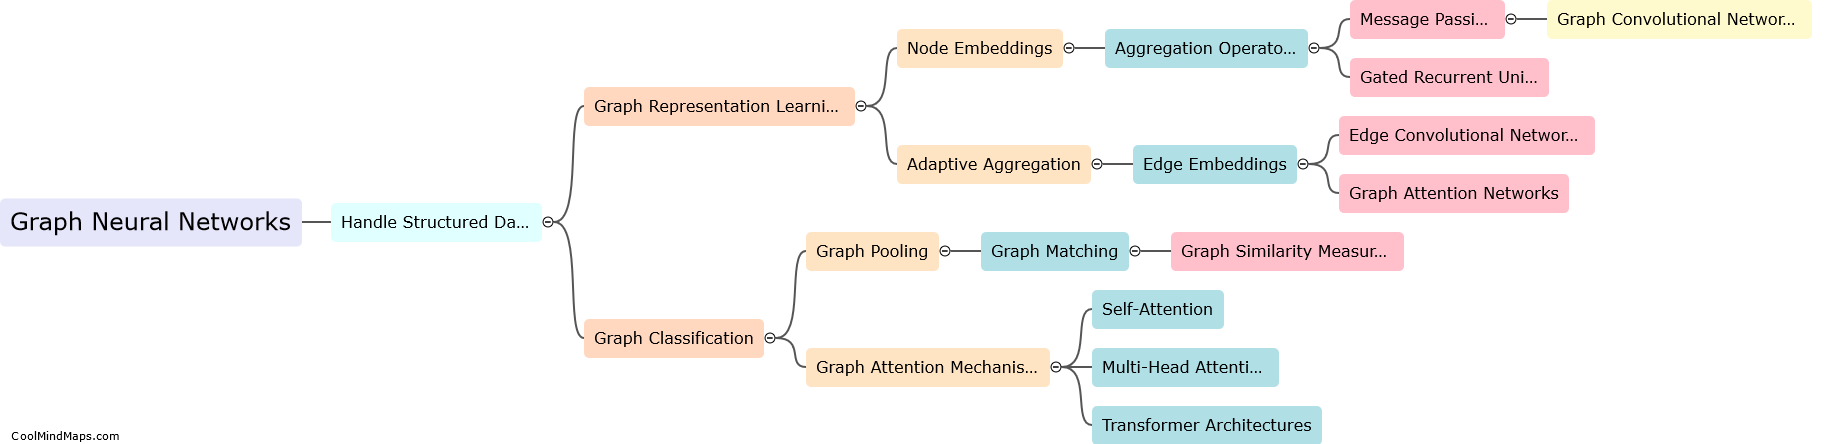 How do graph neural networks handle structured data?